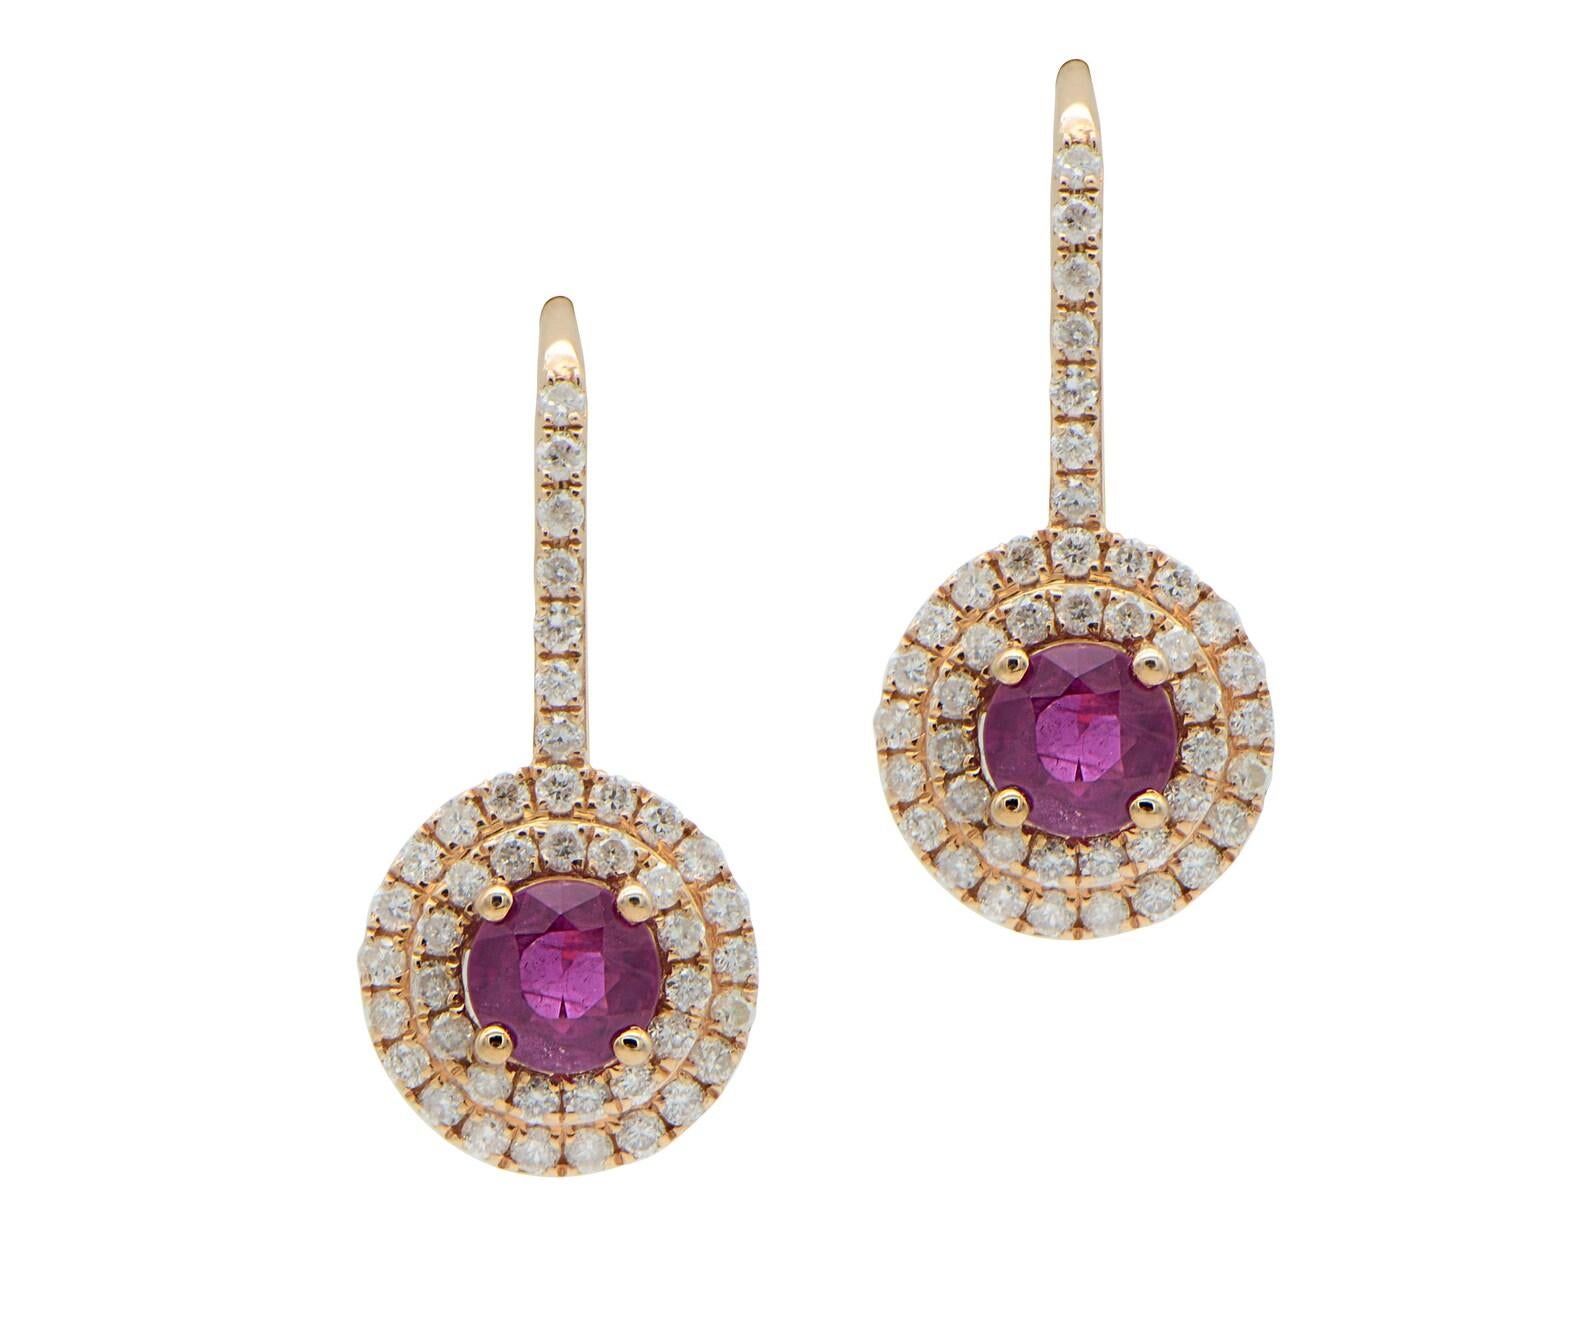 1.82 Total Carat Ruby and Diamond Double Halo Drop Earrings

These beautiful earrings feature lovely rubies in a delicate rose gold setting that perfectly compliments their color. The double halo is created from petite natural diamonds. These trendy